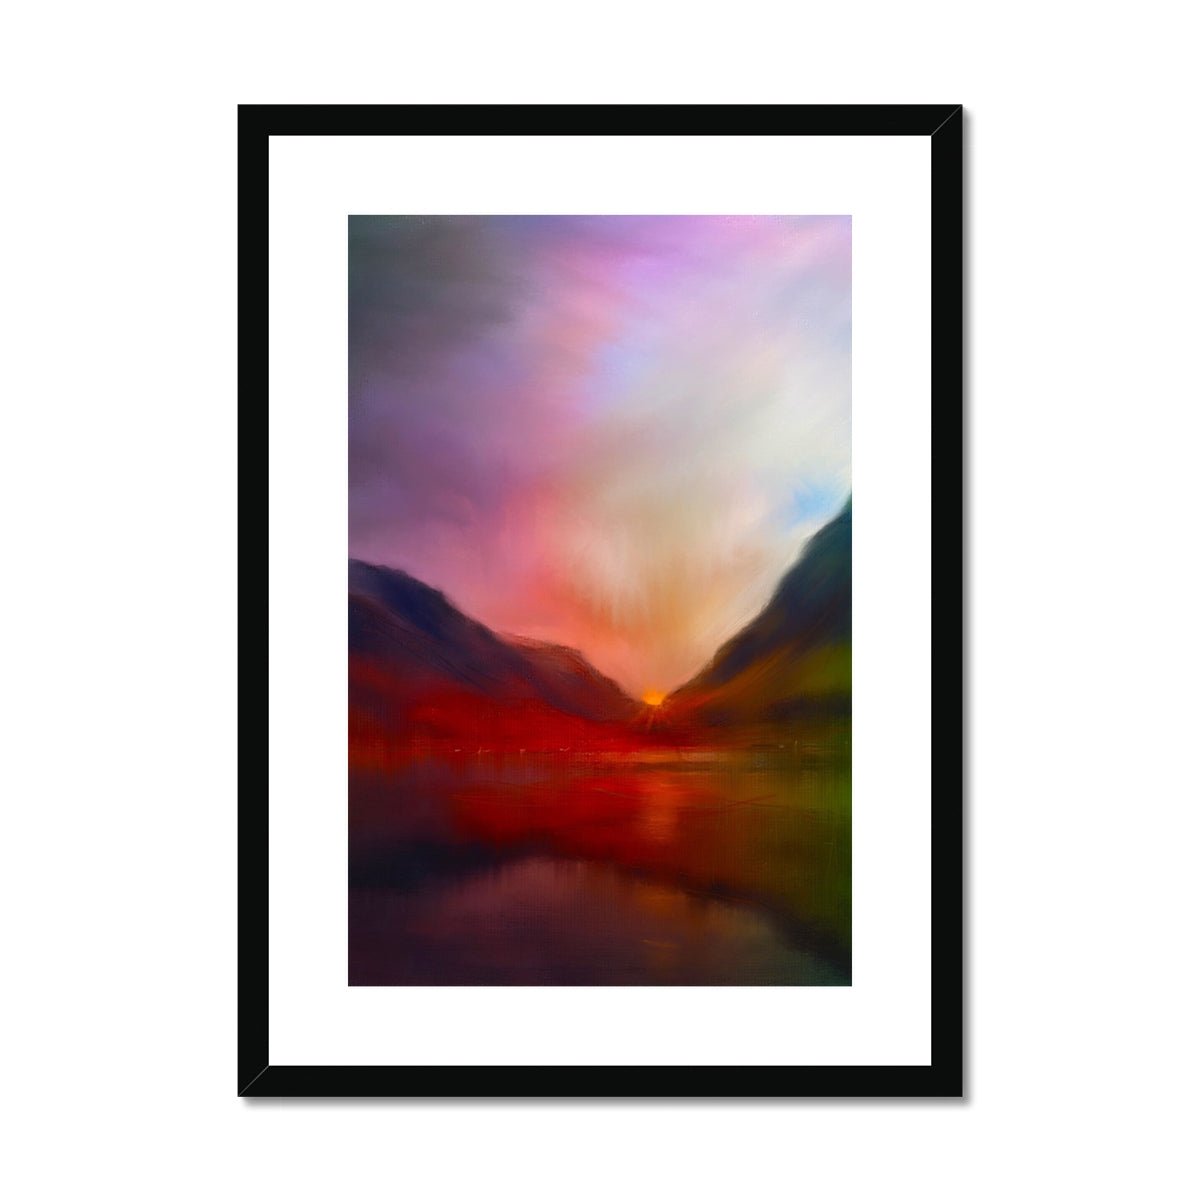 Glencoe Sunset Painting | Framed & Mounted Prints From Scotland-Framed & Mounted Prints-Glencoe Art Gallery-A2 Portrait-Black Frame-Paintings, Prints, Homeware, Art Gifts From Scotland By Scottish Artist Kevin Hunter